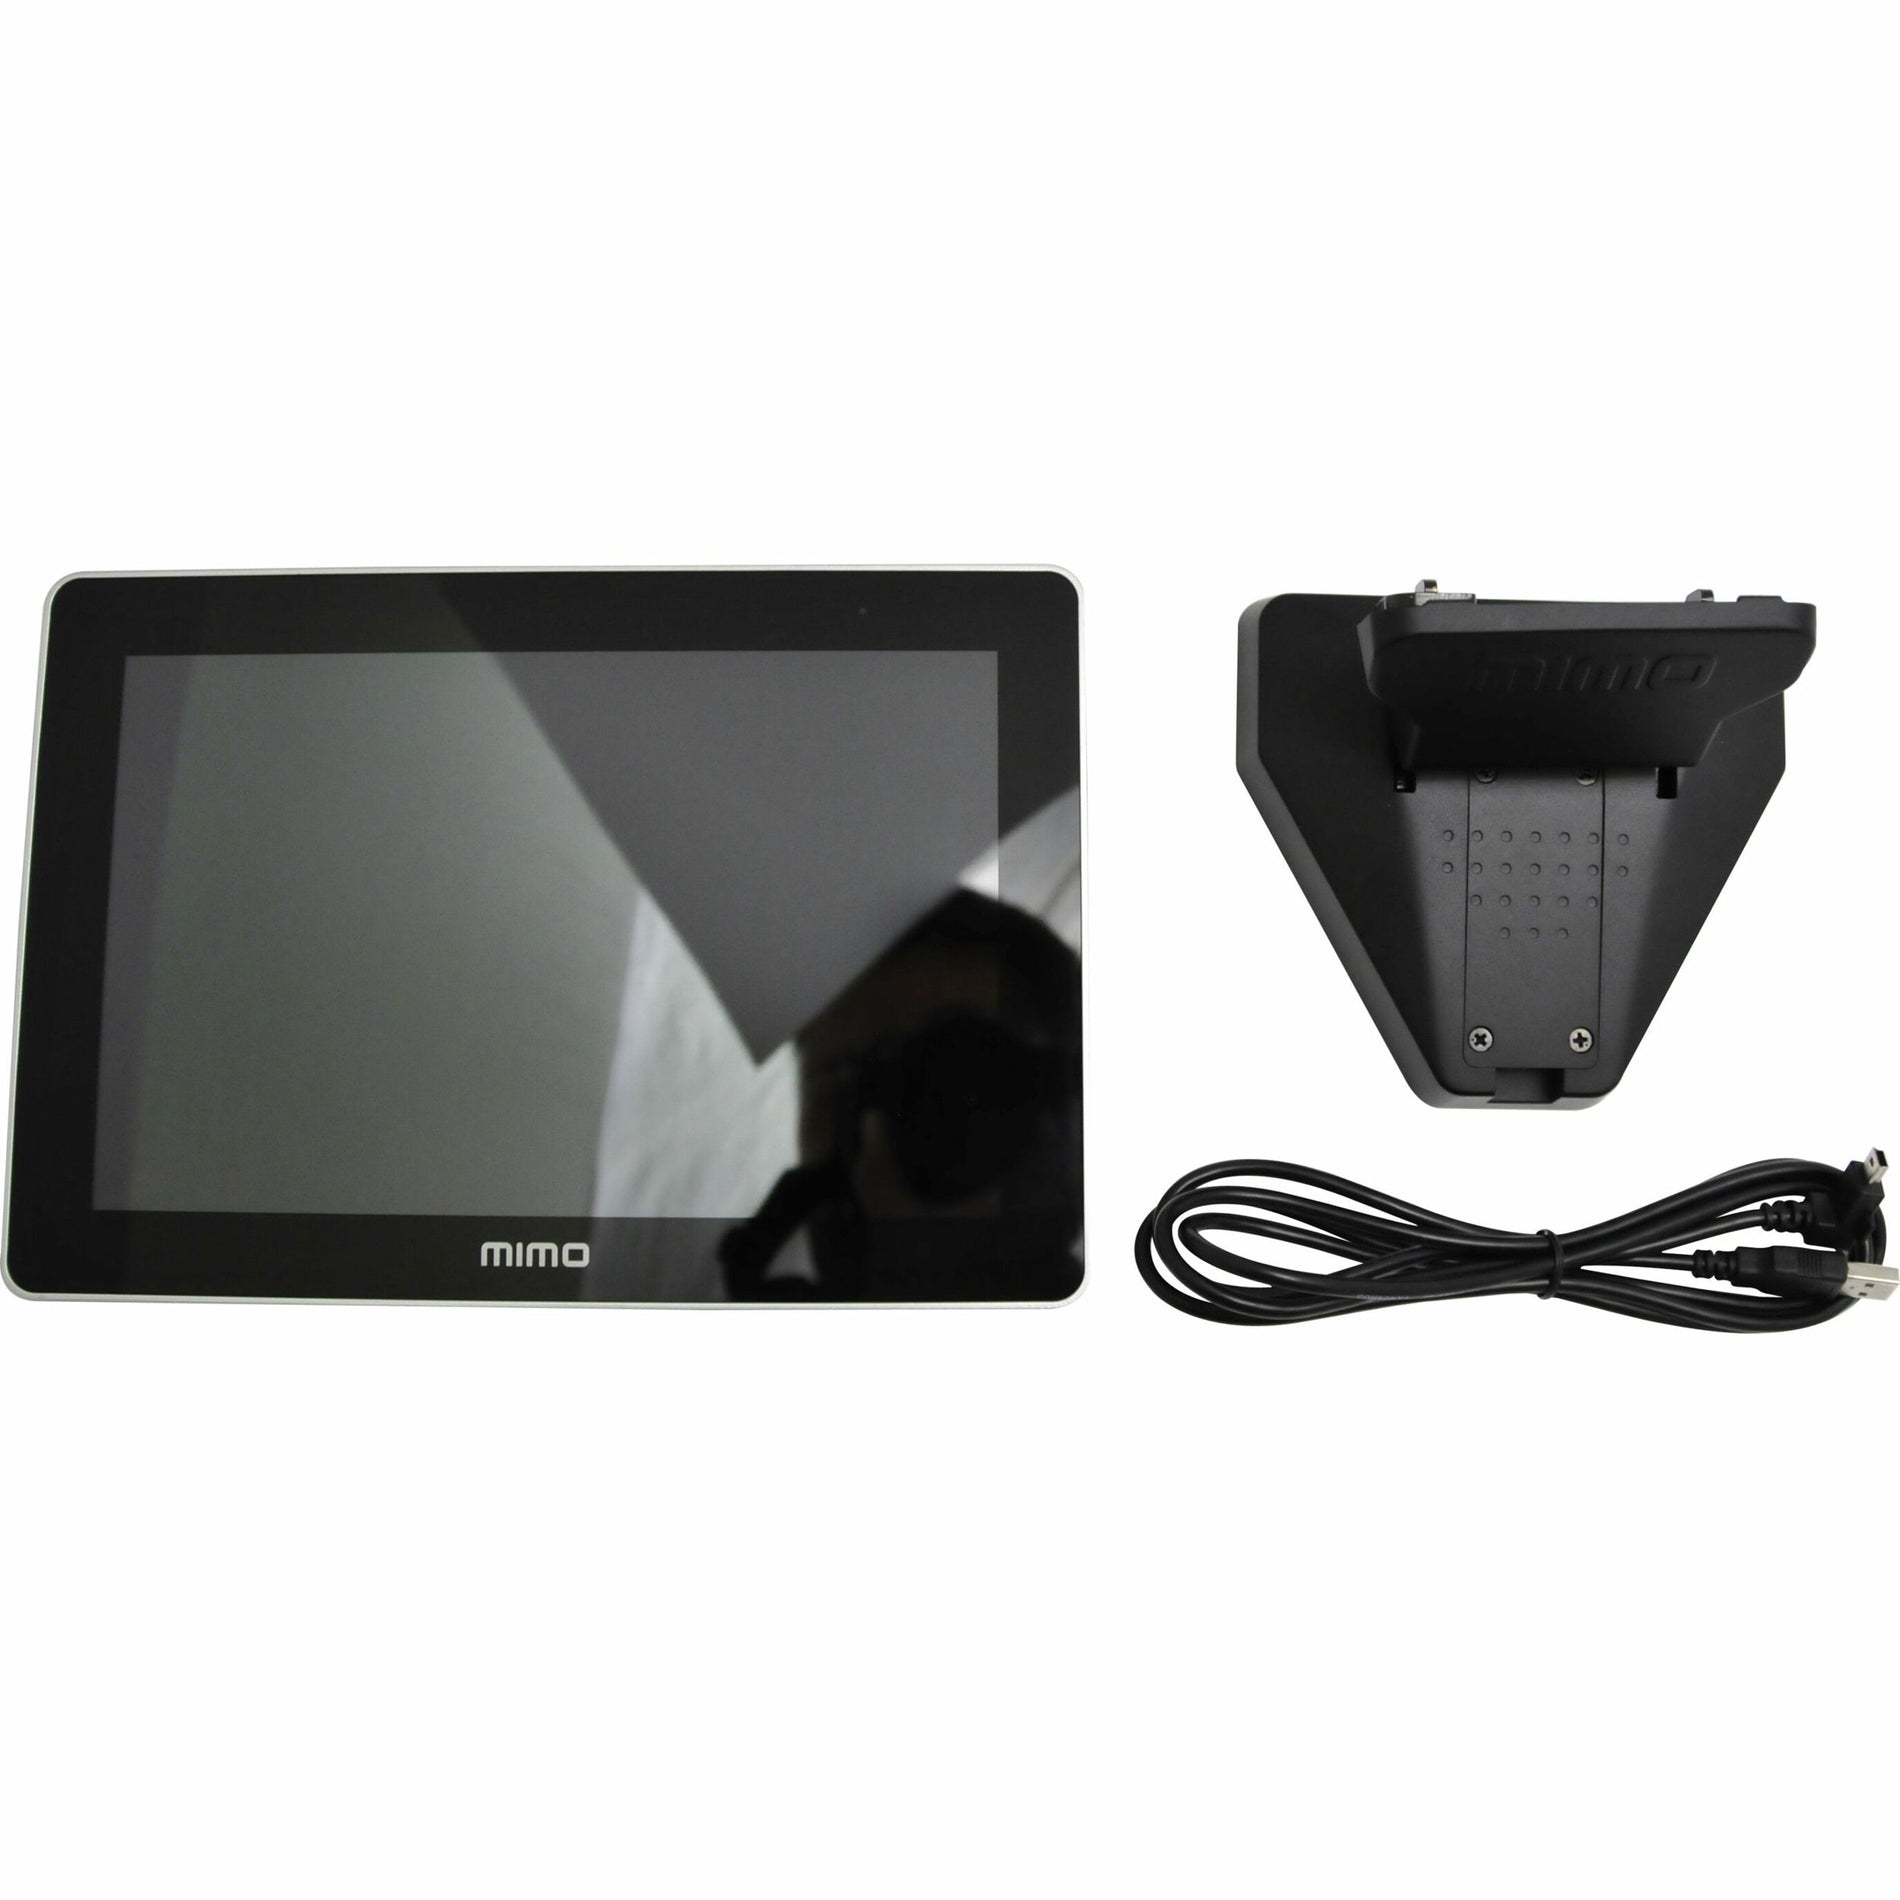 Mimo Monitors UM-1080C-G Vue HD 10.1" Touchscreen LCD Monitor, 1280 x 800, 800:1 Contrast Ratio, USB